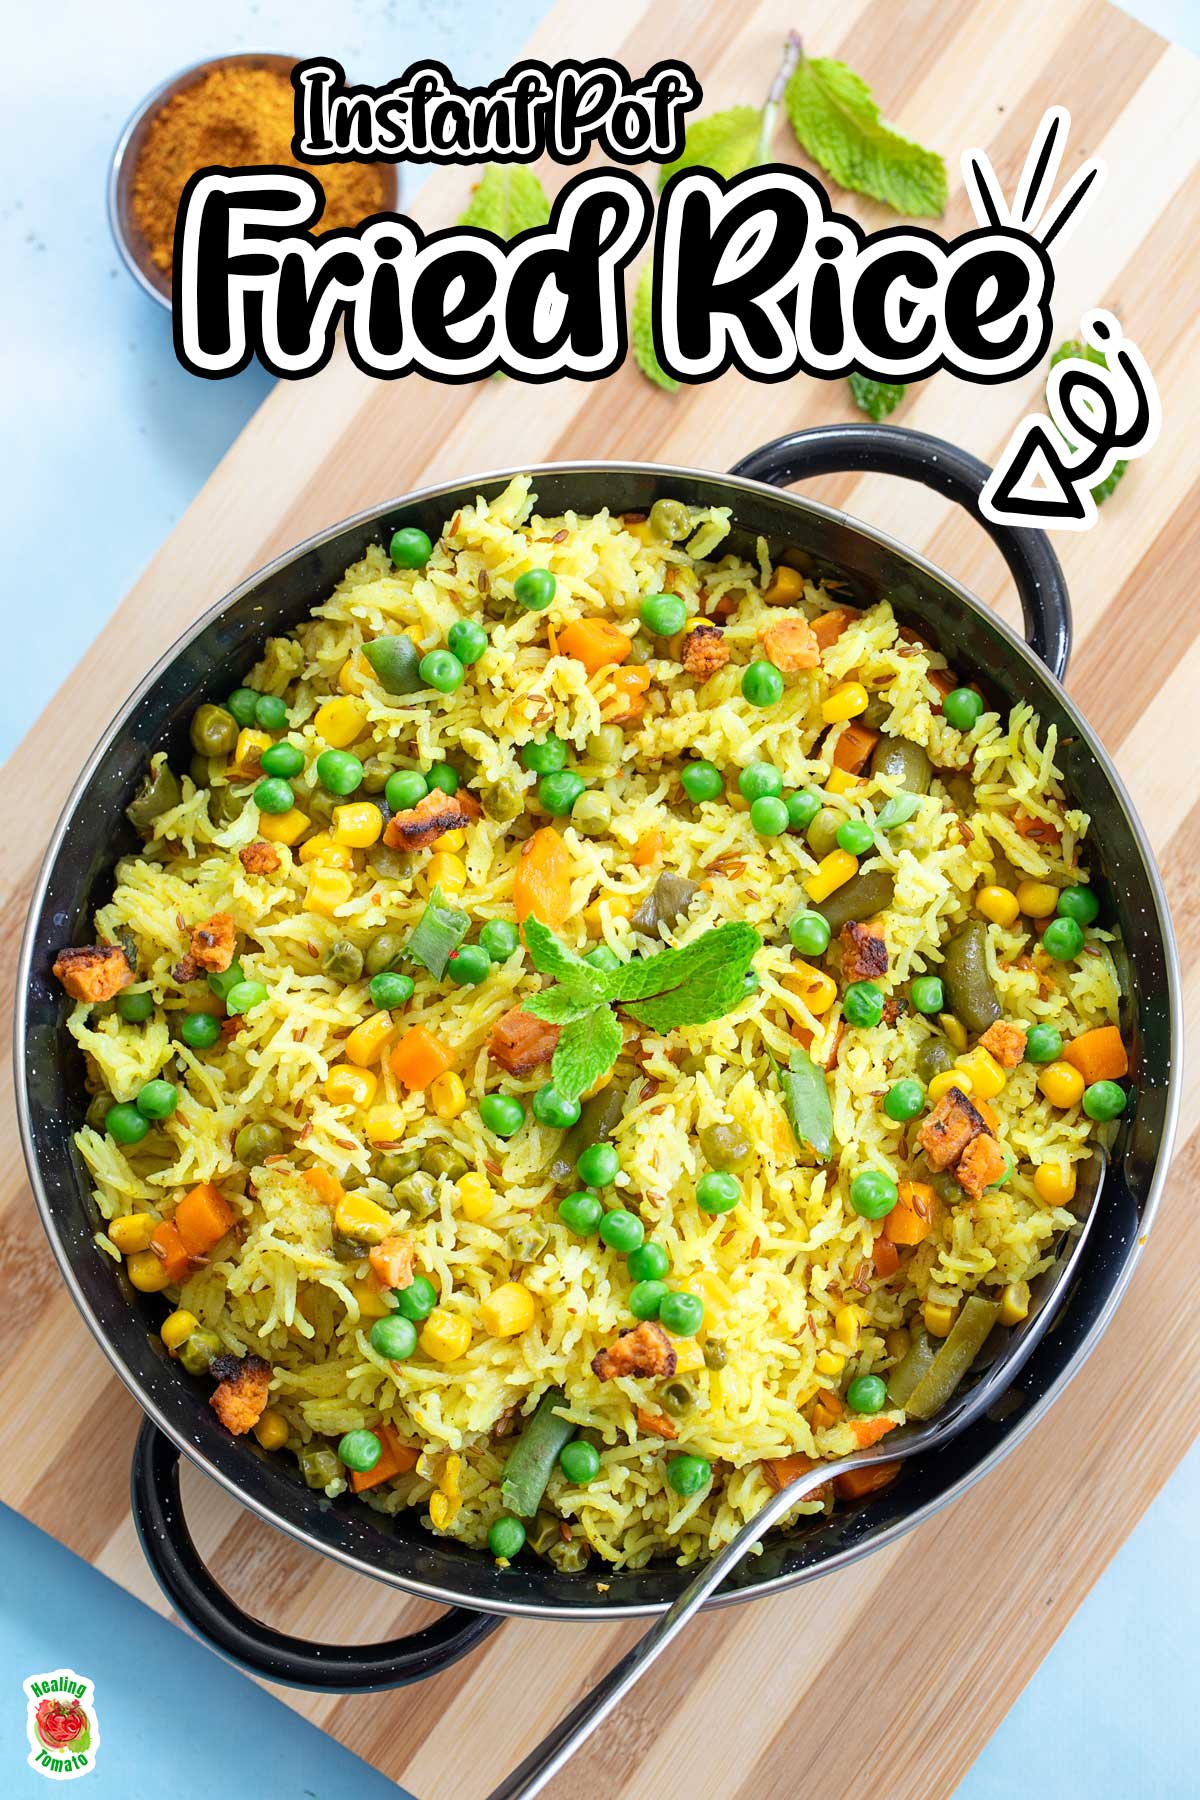 Top view of a pan filled with corn, peas, green beans and carrots cooked with basmati rice.